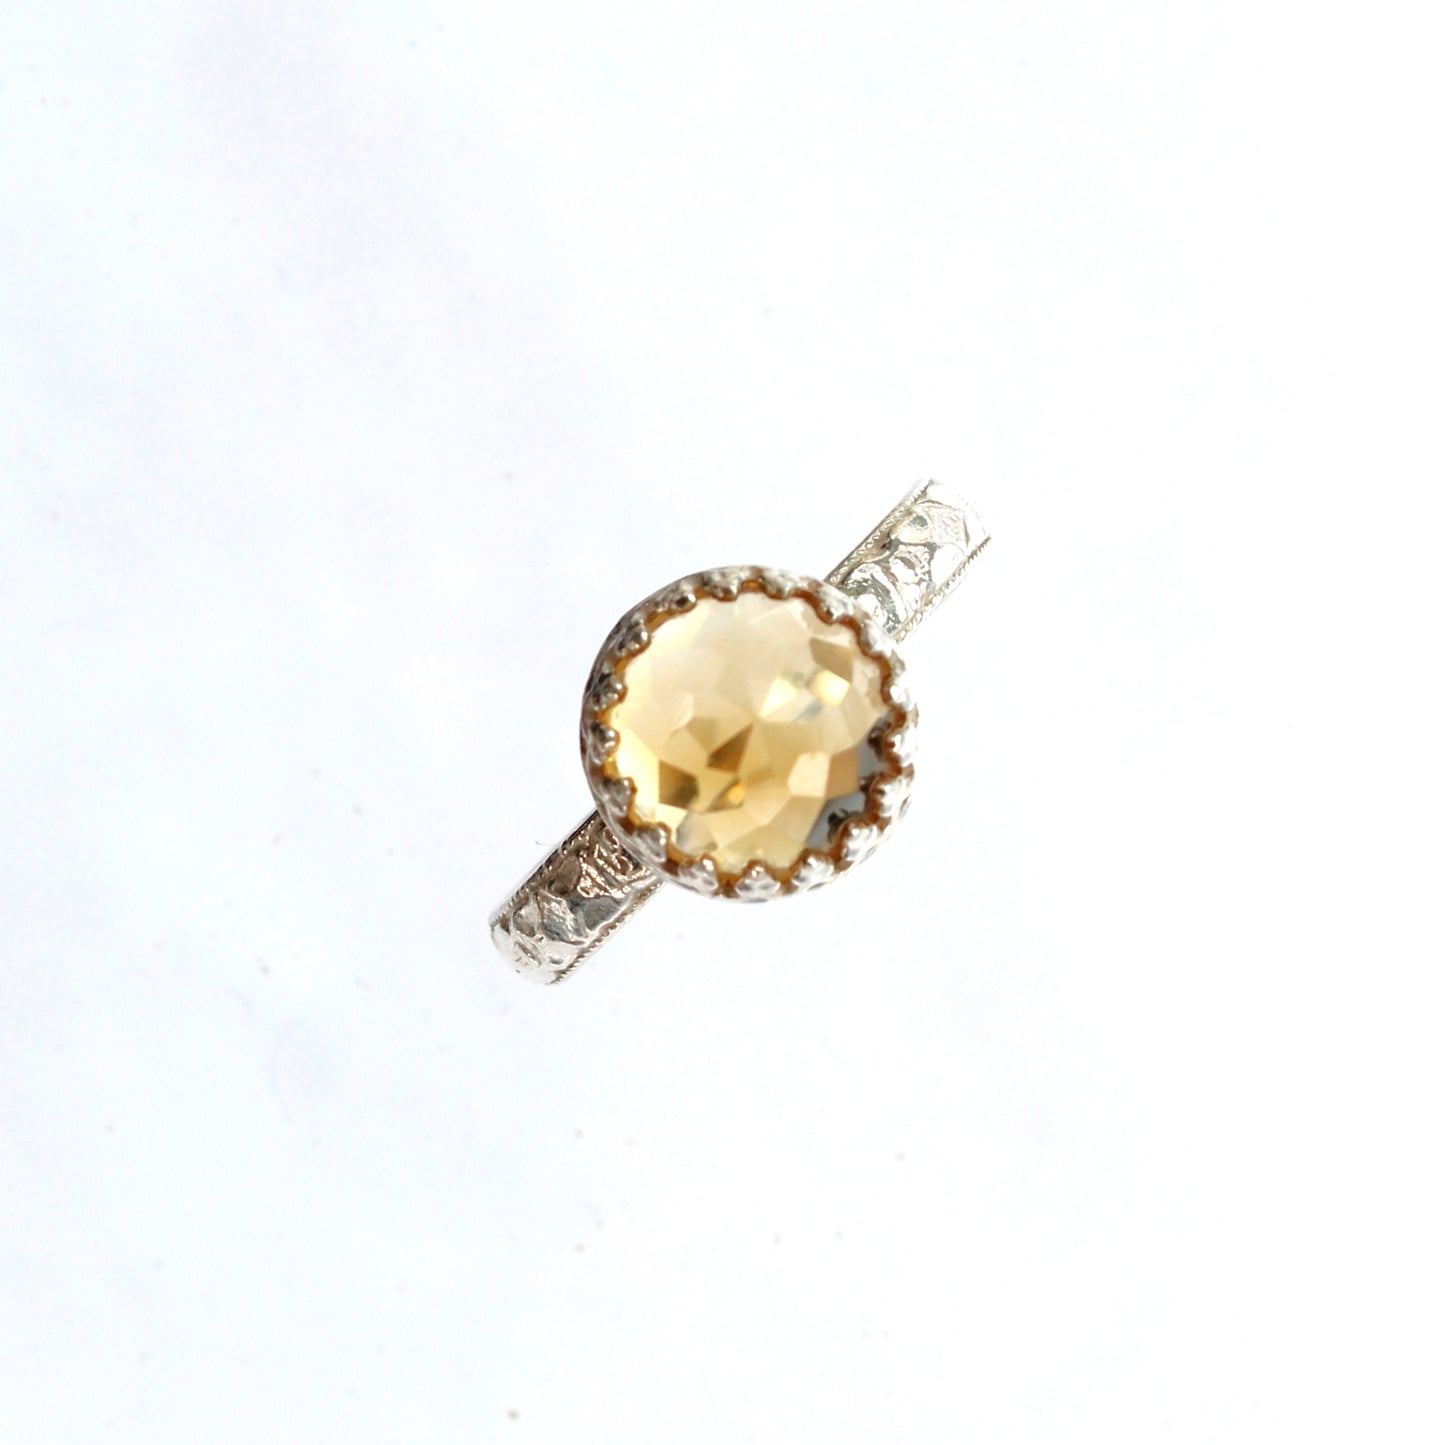 Citrine Yellow Faceted Gemstone Handmade in Sterling Silver with Patterned Band